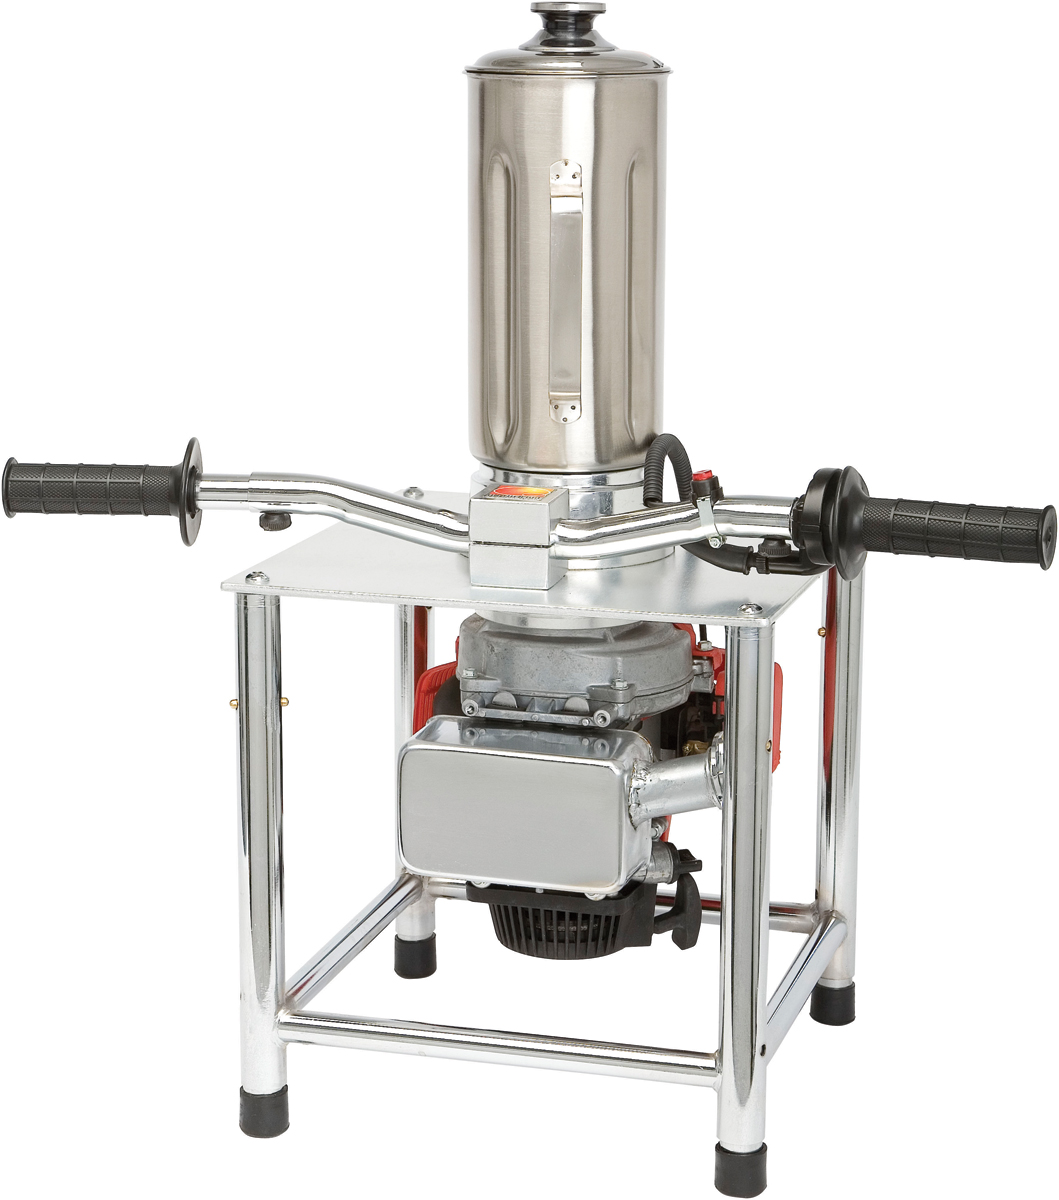 [DISCONTINUED] Gas Powered 2 Stroke Blender